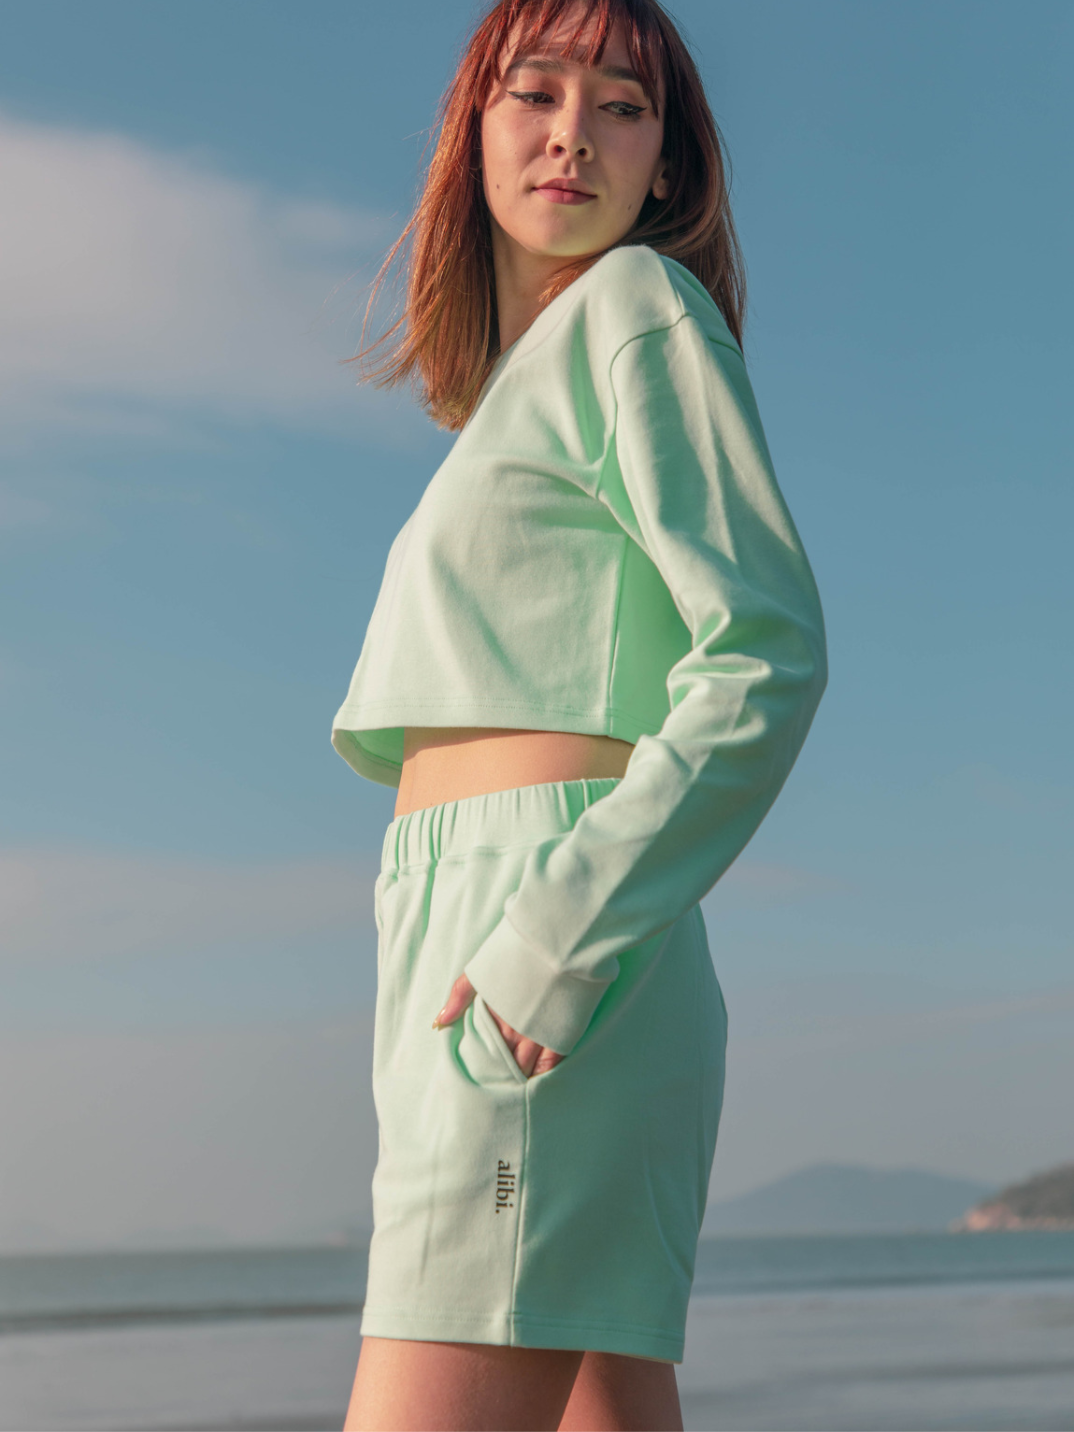 comfortable sustainable durable biologically defensive sustainable fashion eco cropped sweater mint green